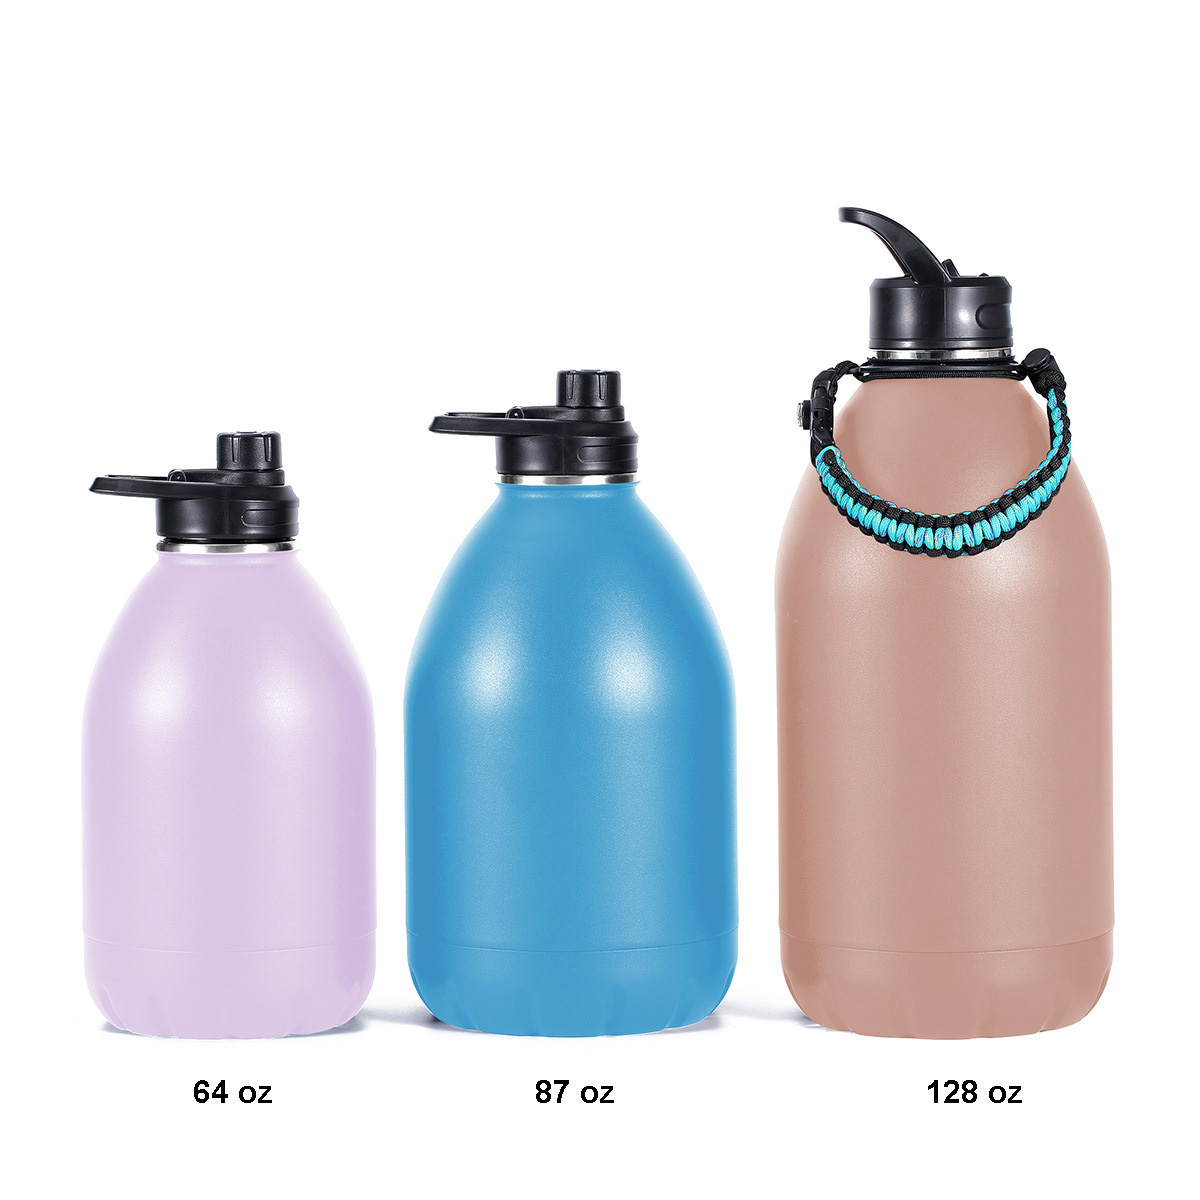 https://www.waterbottle.tech/wp-content/uploads/2021/11/large-capacity-water-bottle-1-gallon-3.8-liter-stainless-steel-insulated-growler-flask-s1112800-7.jpg